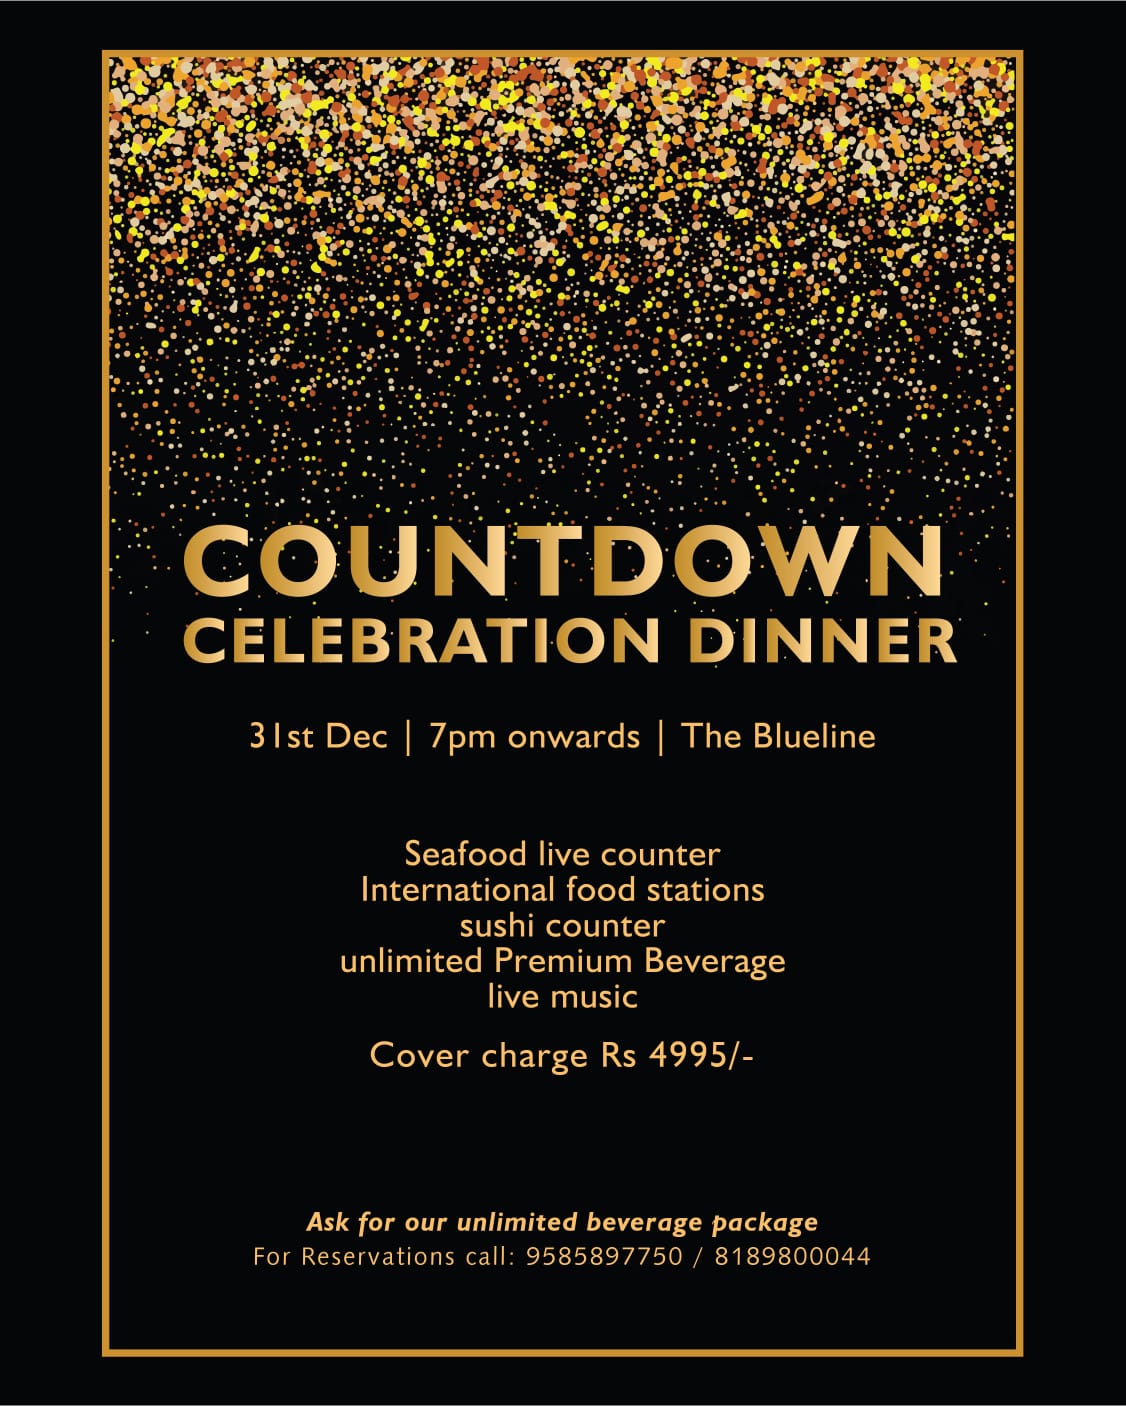 Countdown Celebration Dinner New Year's Eve at Promenade